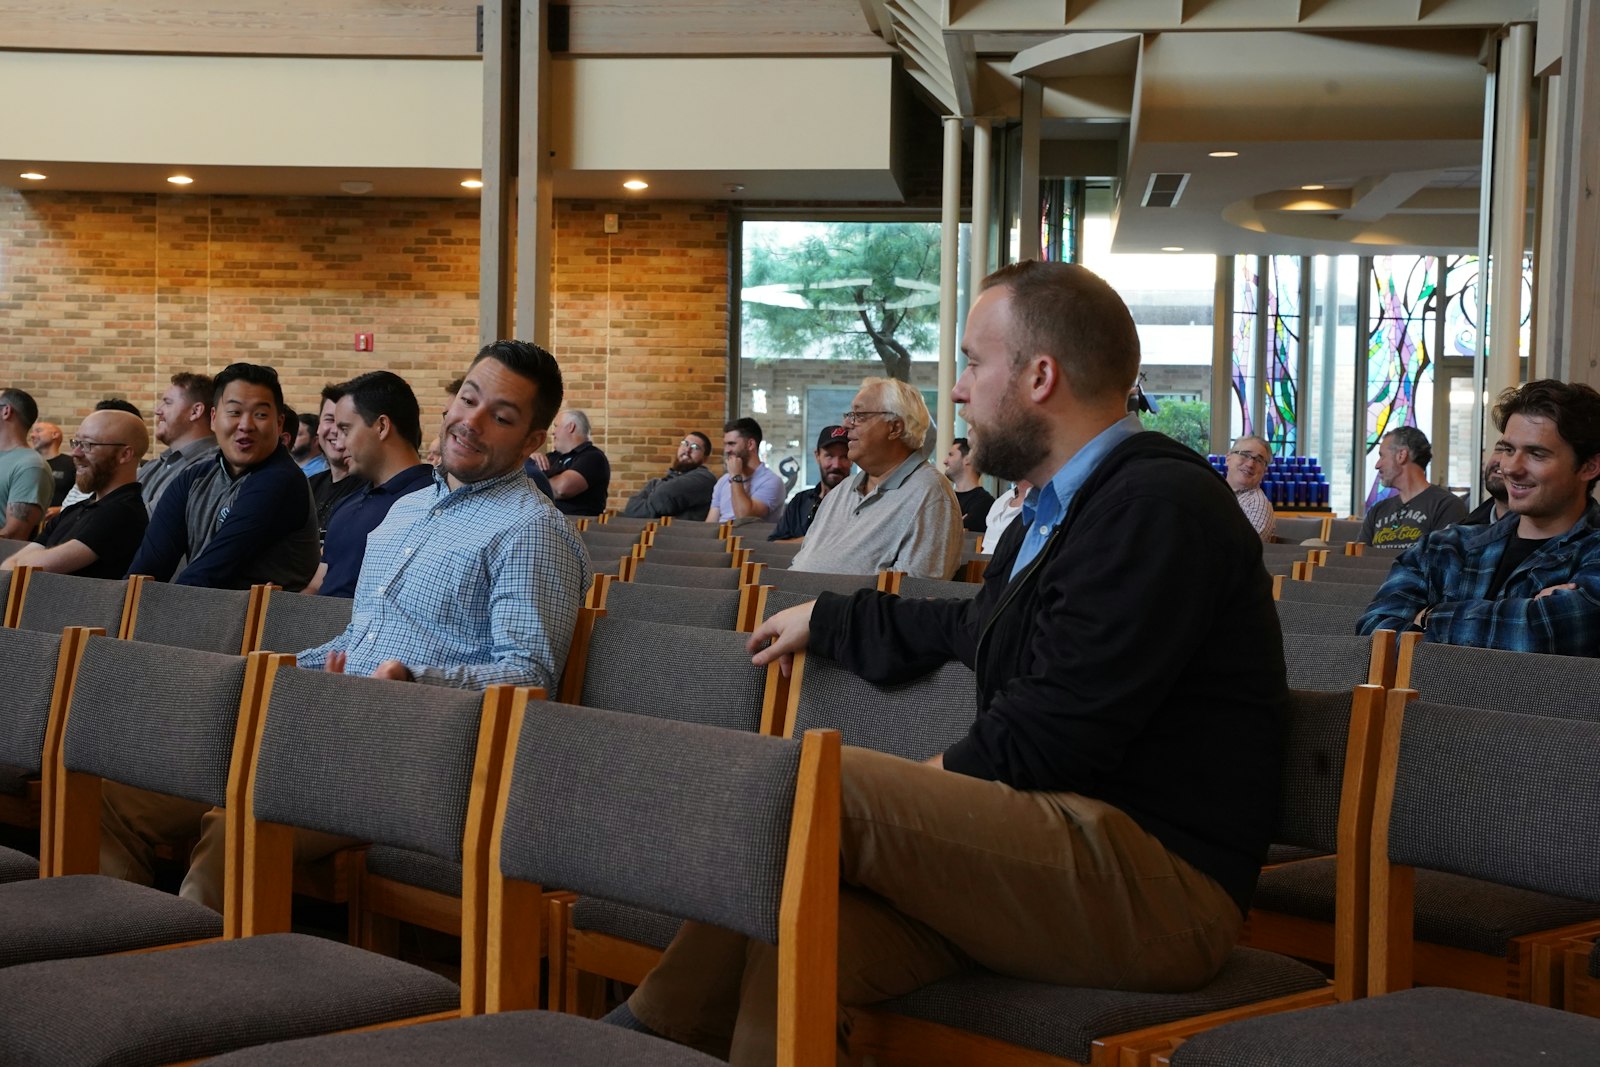 About 300 men attended the conference, which included talks on building a sacramental life, the importance of prayer, and the dangers of lust and internet pornography usage.